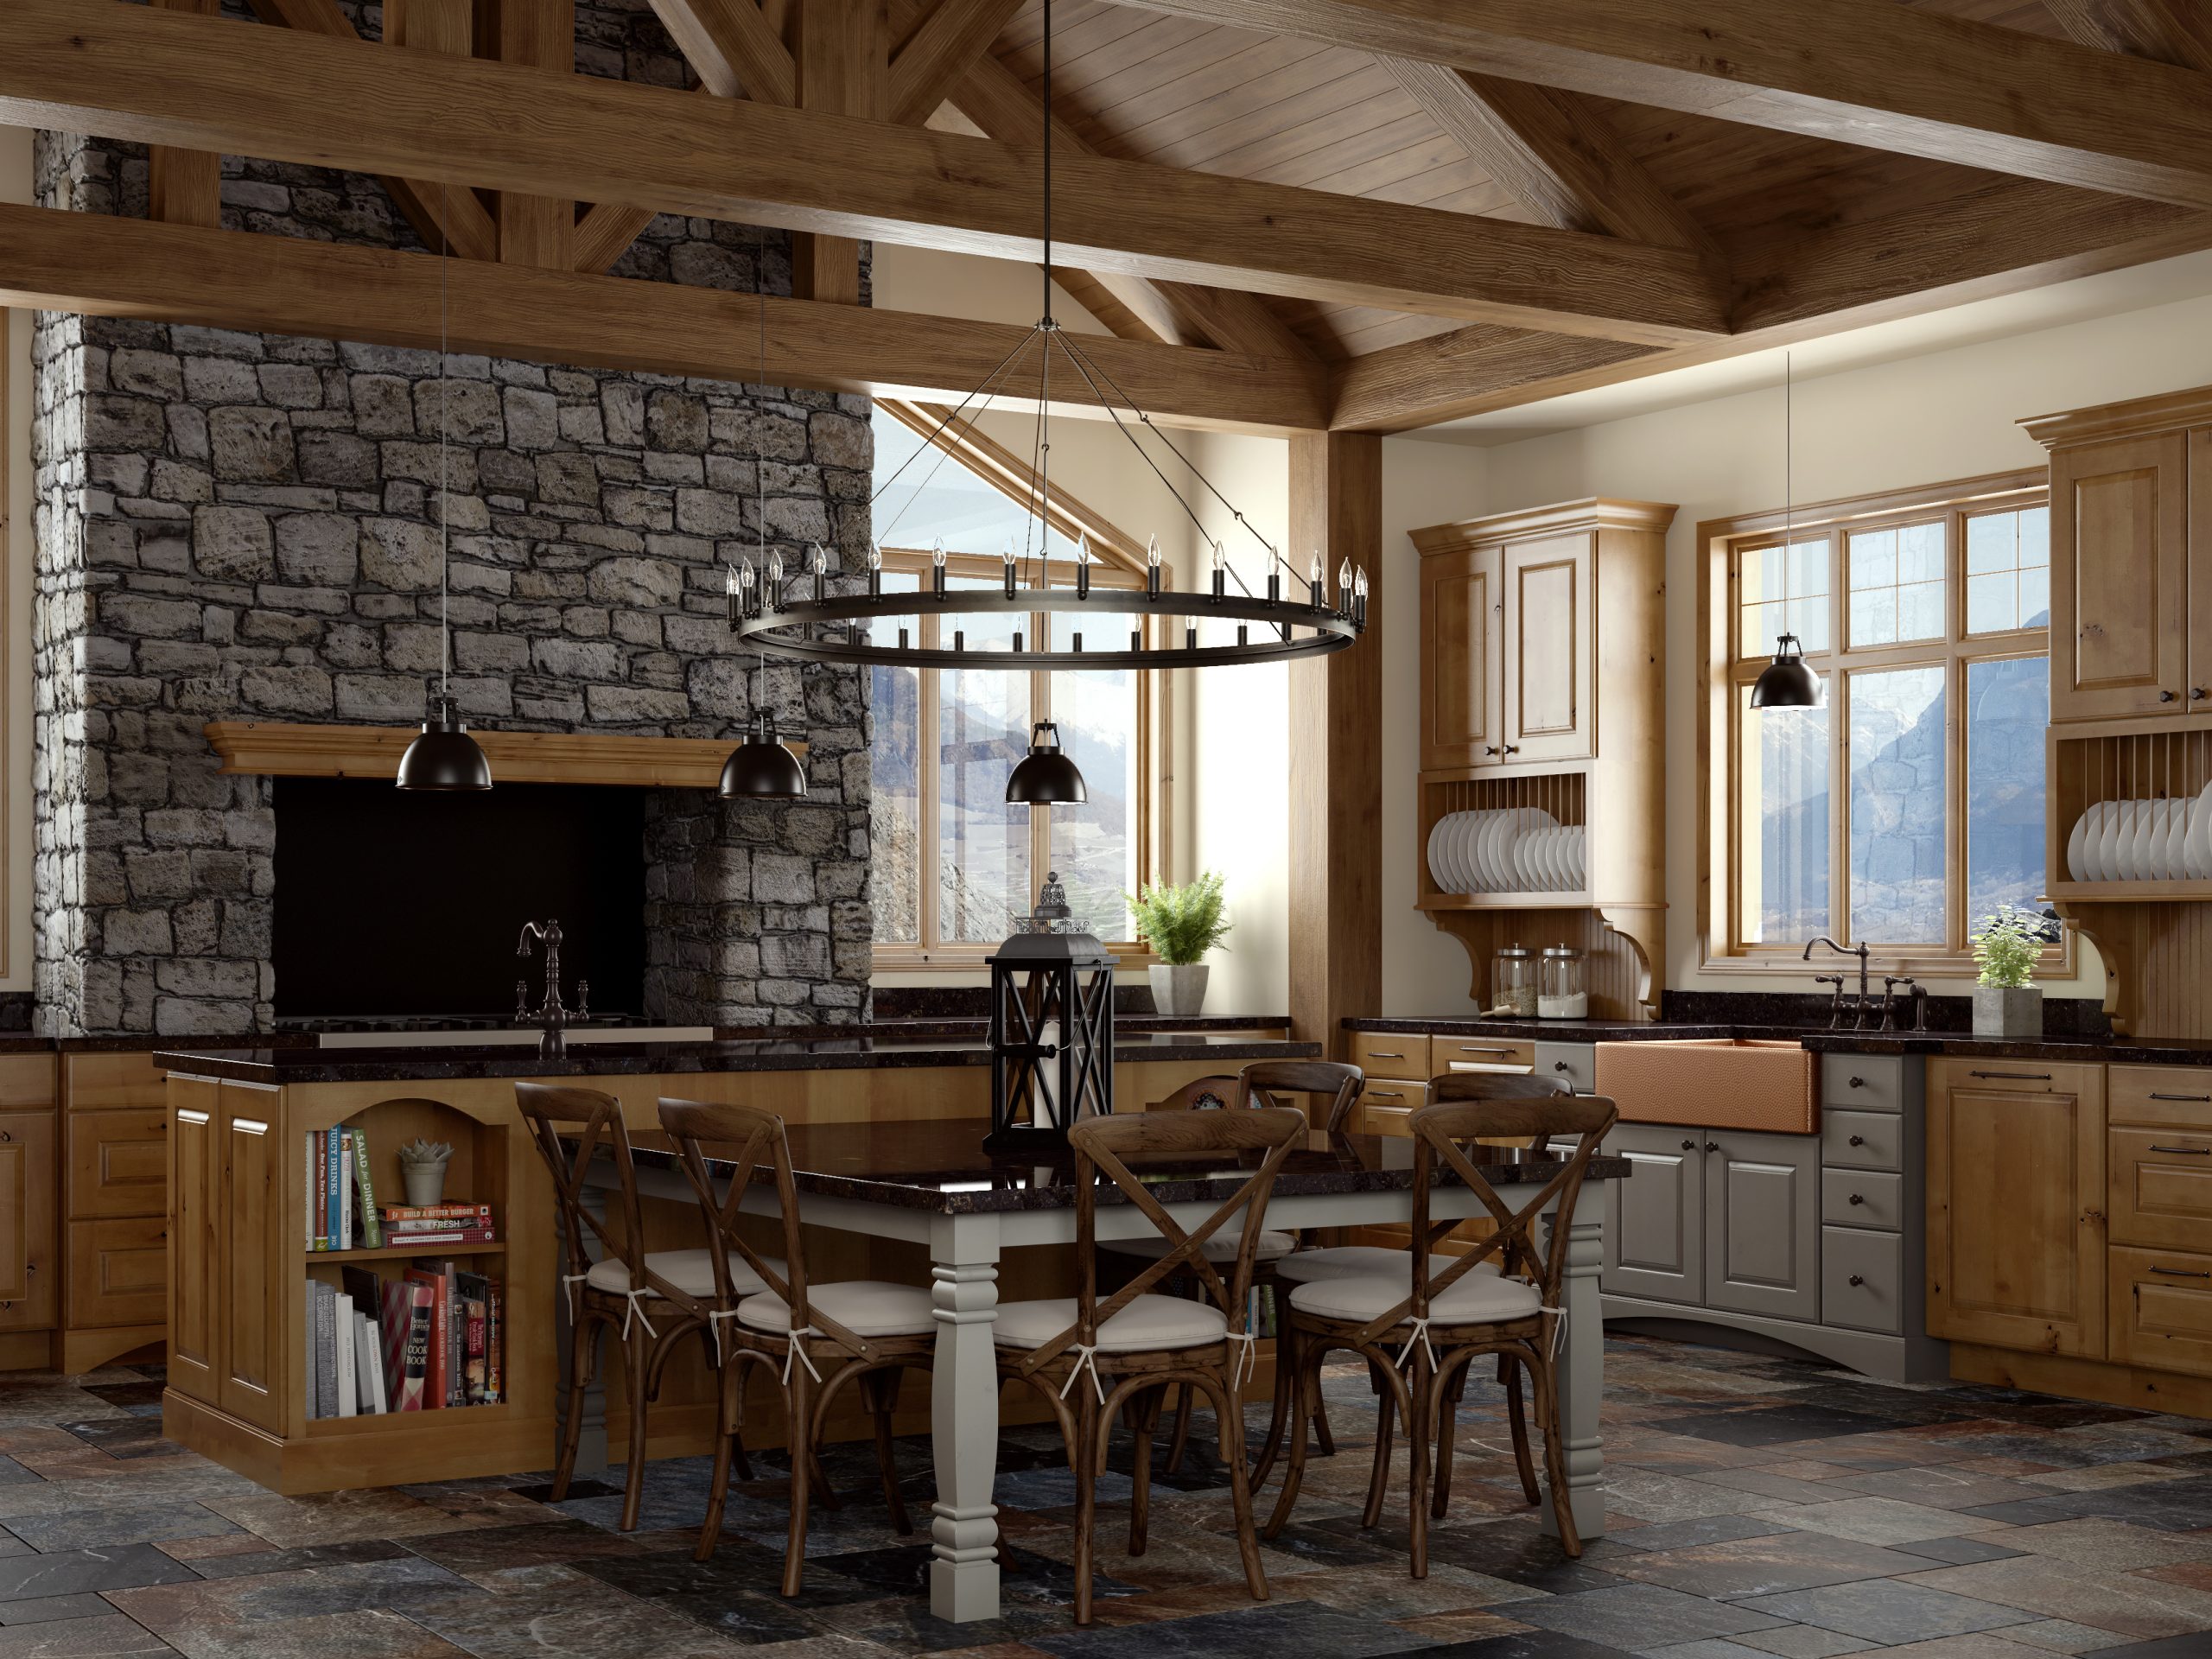 Shop Woodland Cabinetry, premiere cabinets at French Creek Designs Kitchen & Bath Store in Casper, WY